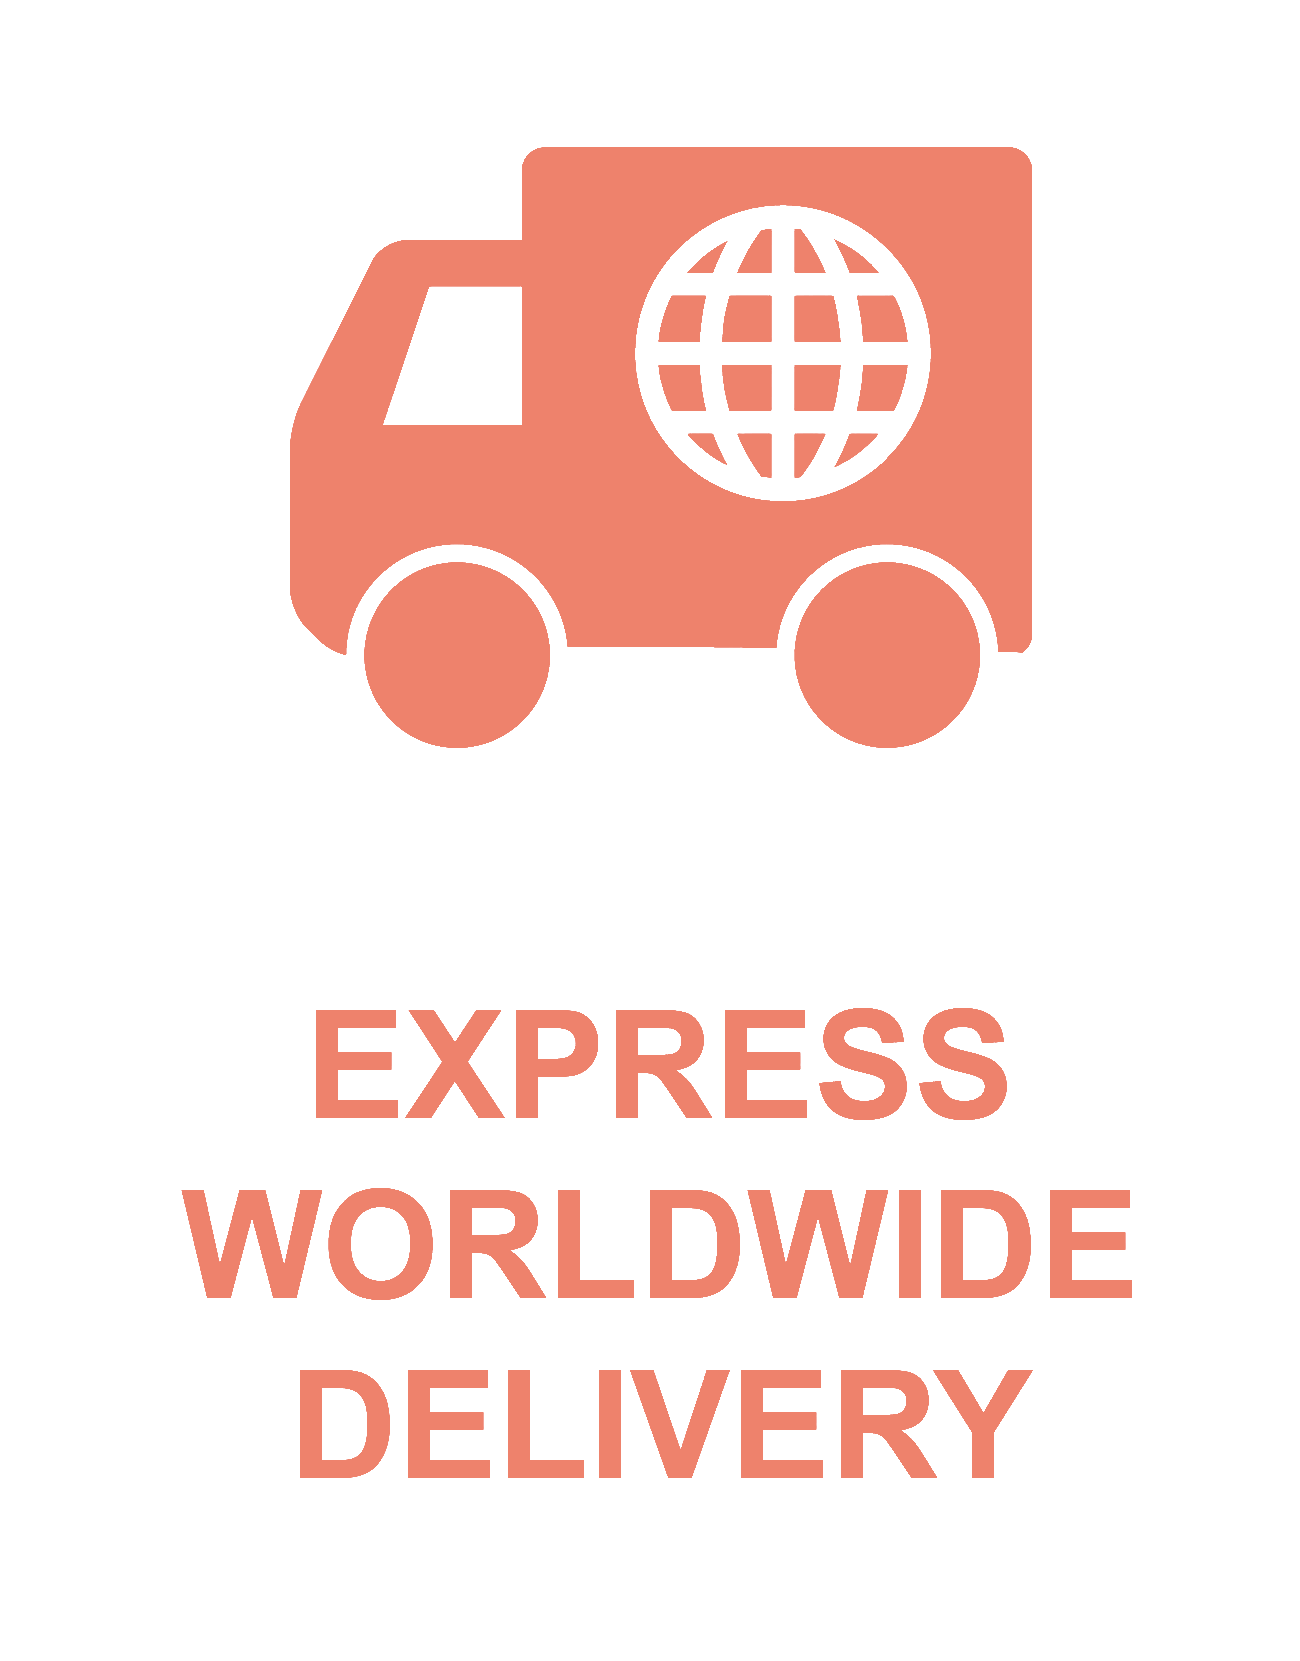 EXPRESS WORLDWIDE DELIVERY